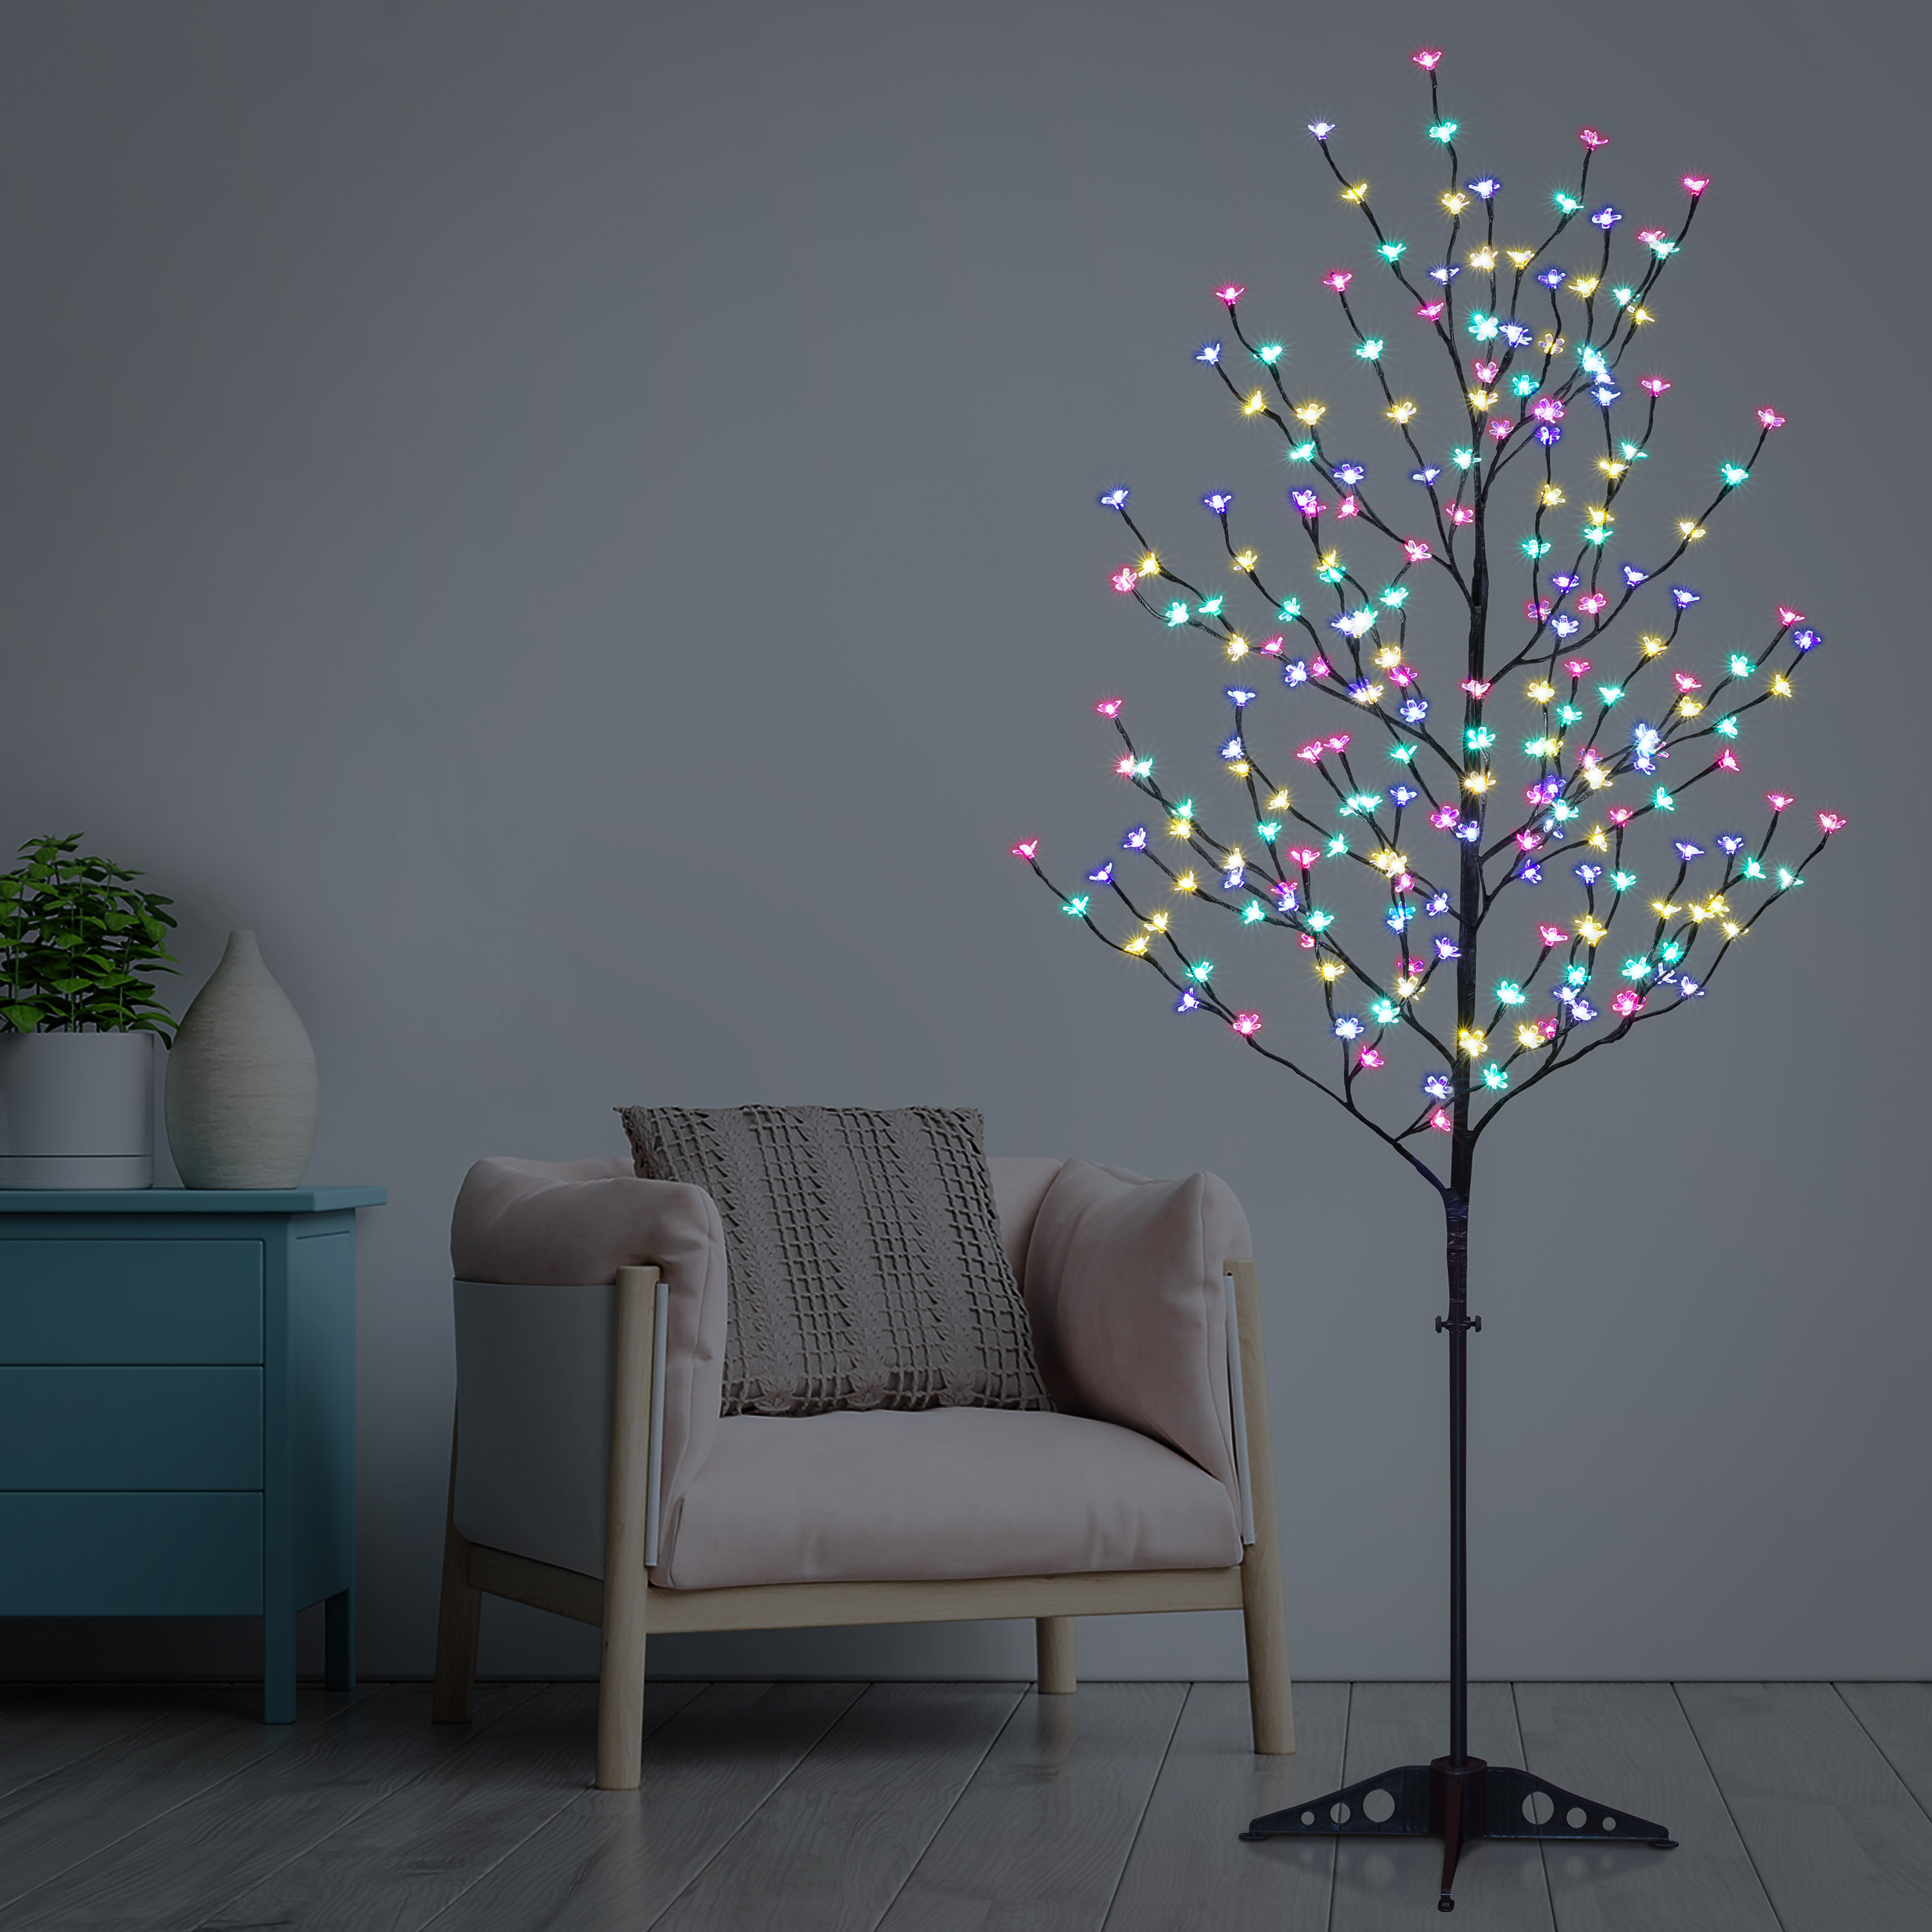 6.5ft Lighted Cherry Blossom Tree, 208 LED Warm White to Multicolor, Timer and Dimmer with Remote, Home Garden, Summer, Wedding, Holiday, Party Decoration for Indoor and Outdoor Use